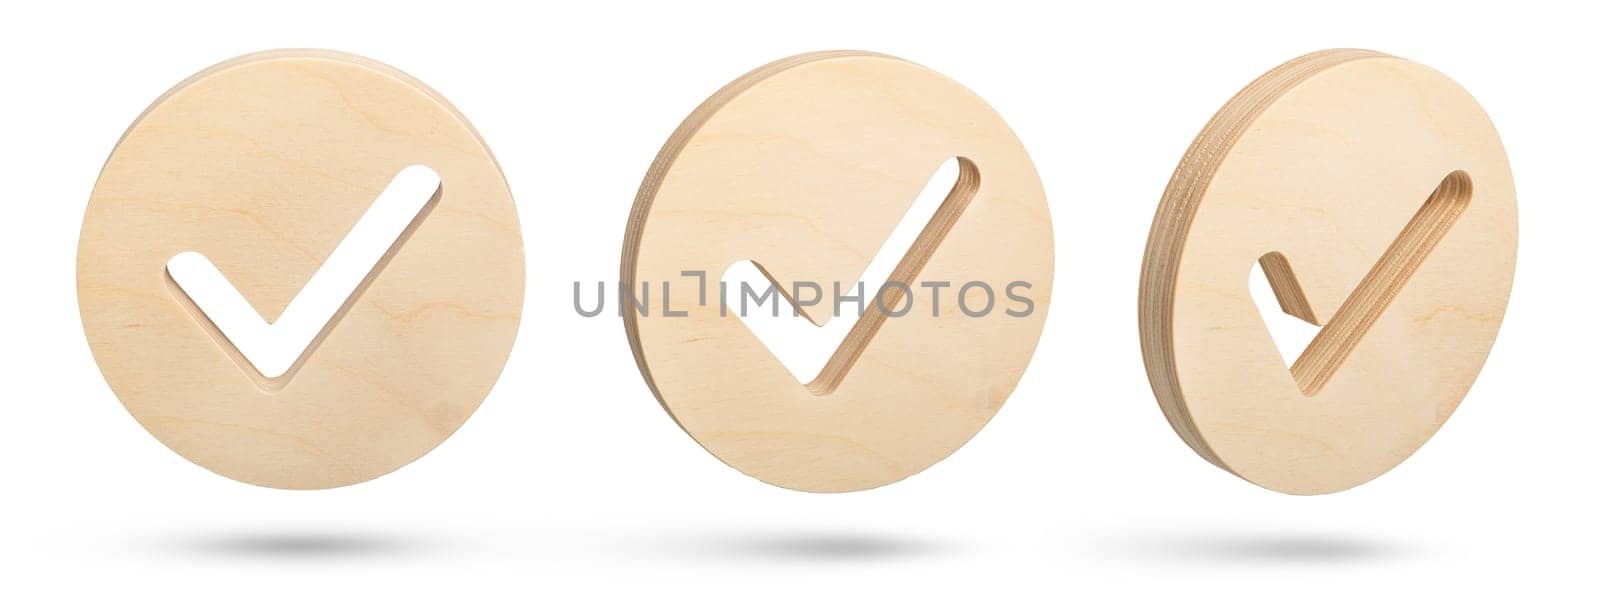 Set of check mark symbols from different sides on a white isolated background. A large wooden round check mark sign is falling down casting a shadow. High quality photo for a design or project